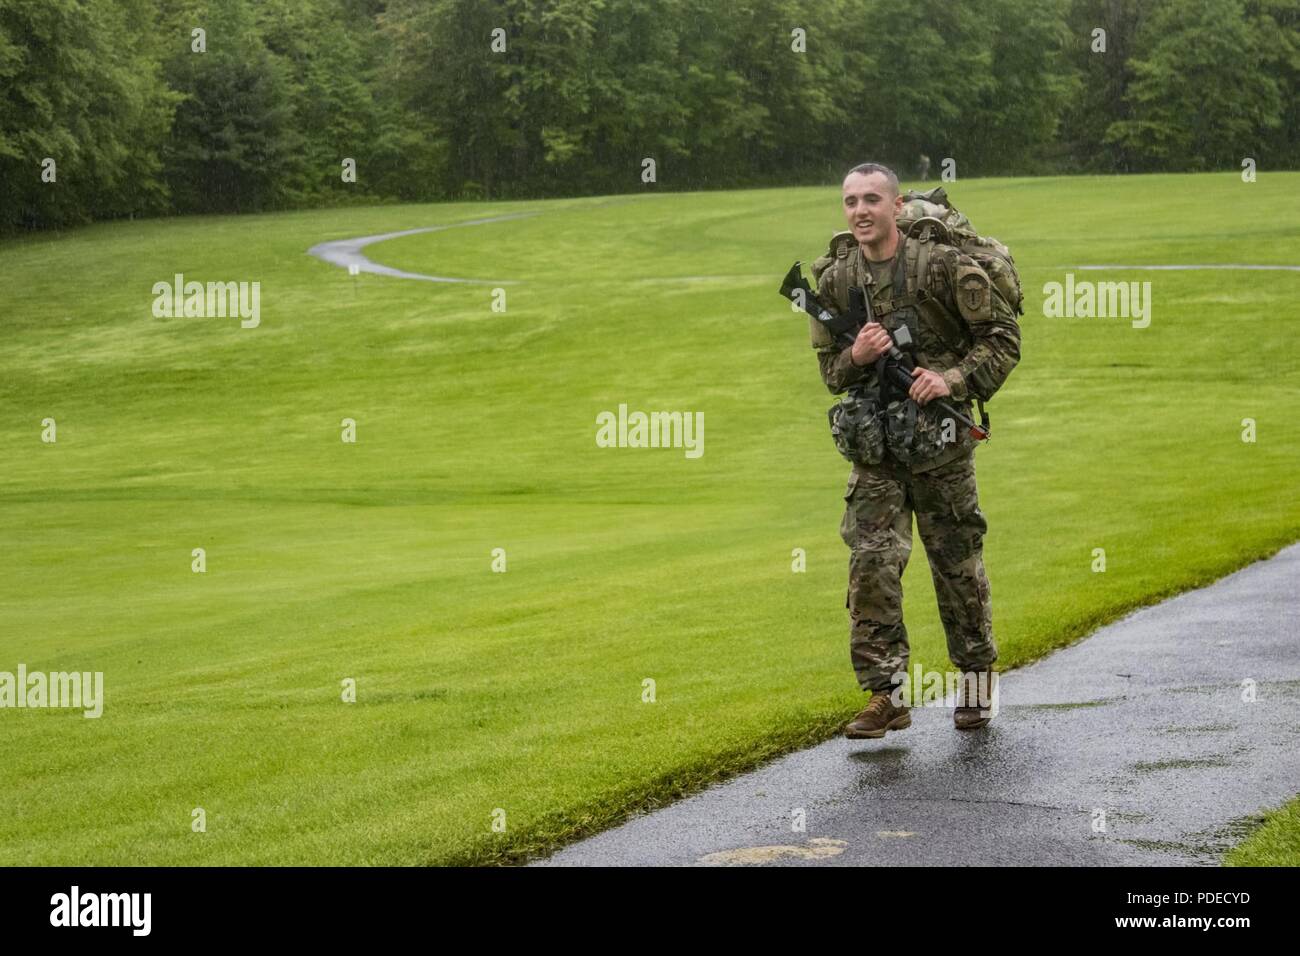 U.S. Army Spc. Nicholas Rossetti, a musician assigned to the 39th Army Band, New Hampshire Army National Guard, completes the 12-mile ruck march portion of the Region 1 Best Warrior Competition at West Point, N.Y., May 19, 2018. The Region 1 Best Warrior Competition, held May 16-19, 2018, is an annual event in which junior enlisted Soldiers and noncommissioned officers (NCOs) from eight Northeastern states compete in several events intended to test their military skills and knowledge, as well as their physical fitness and endurance. The two winners (one junior enlisted and one NCO) will go on  Stock Photo